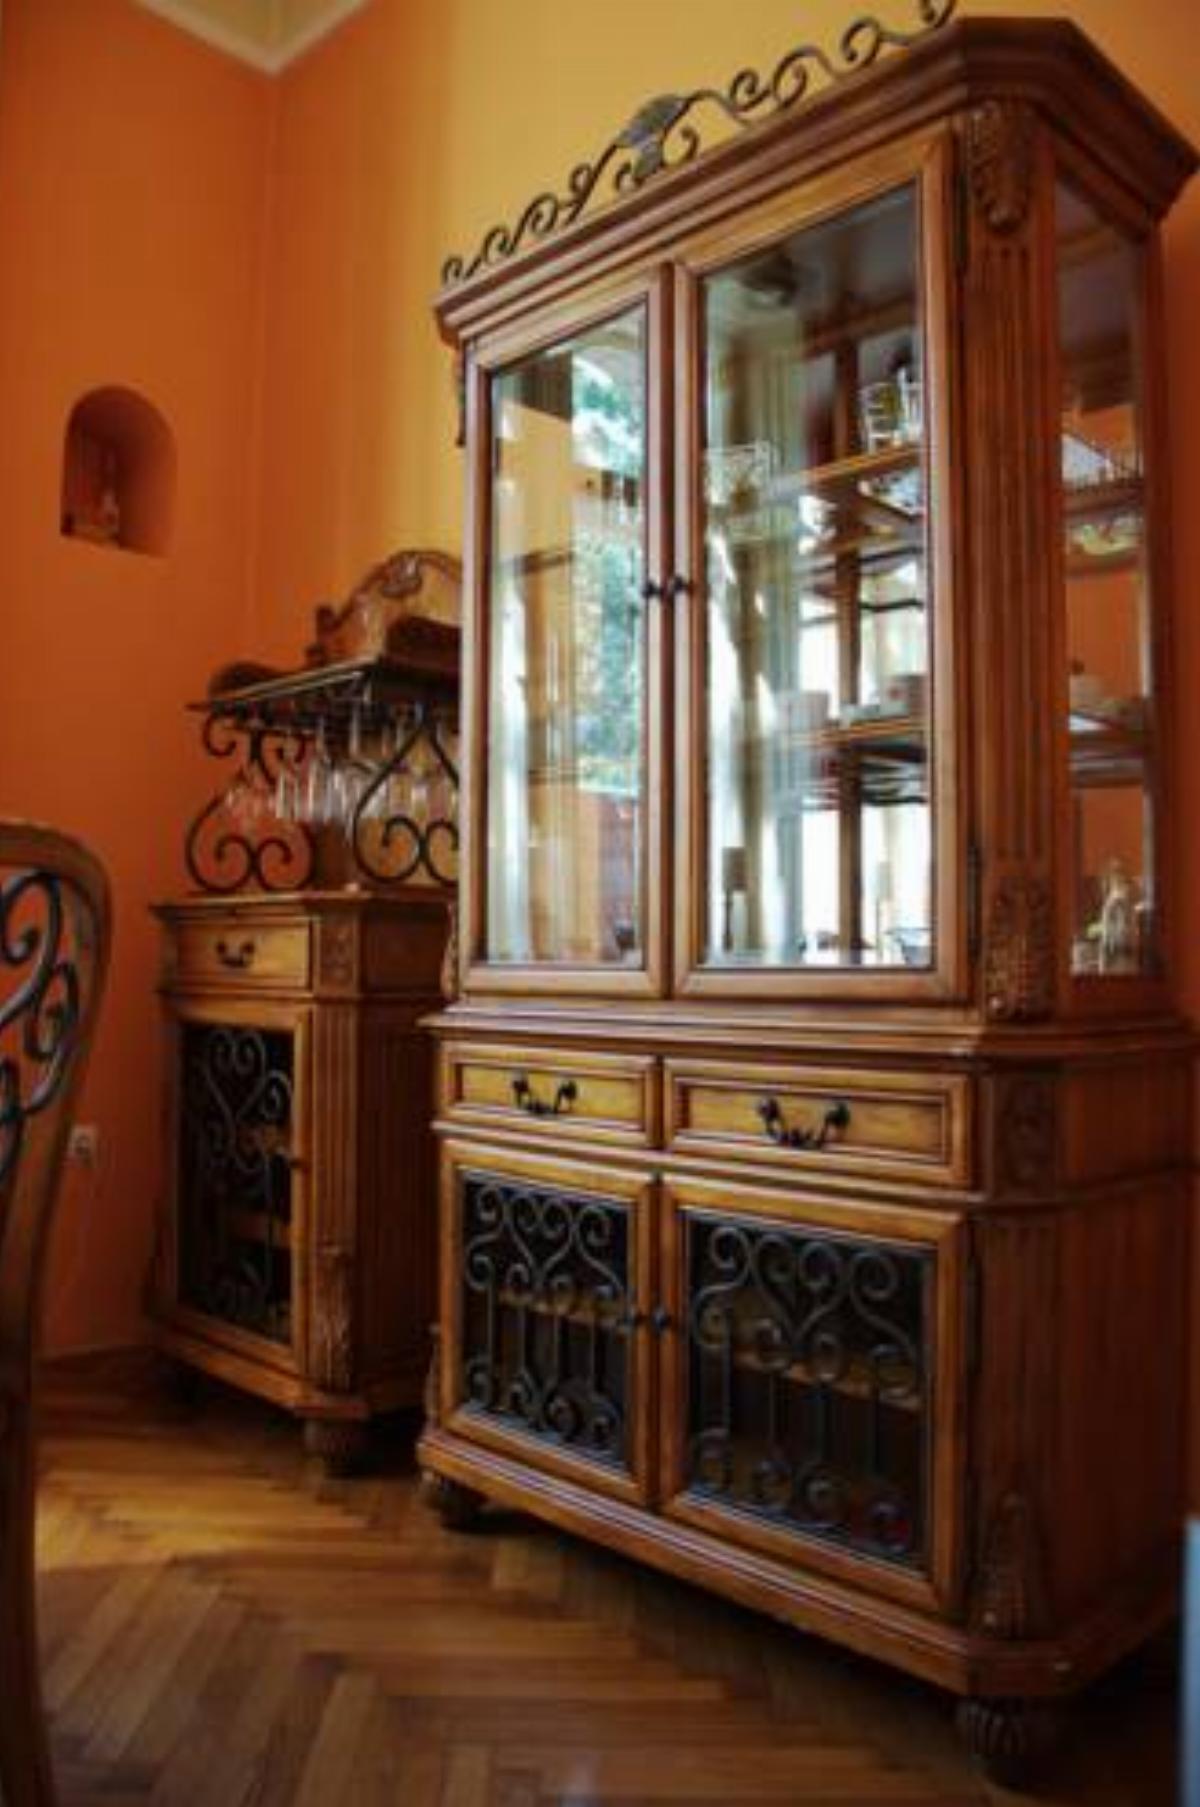 D24 Boutique Apartment Hotel Budapest Hungary